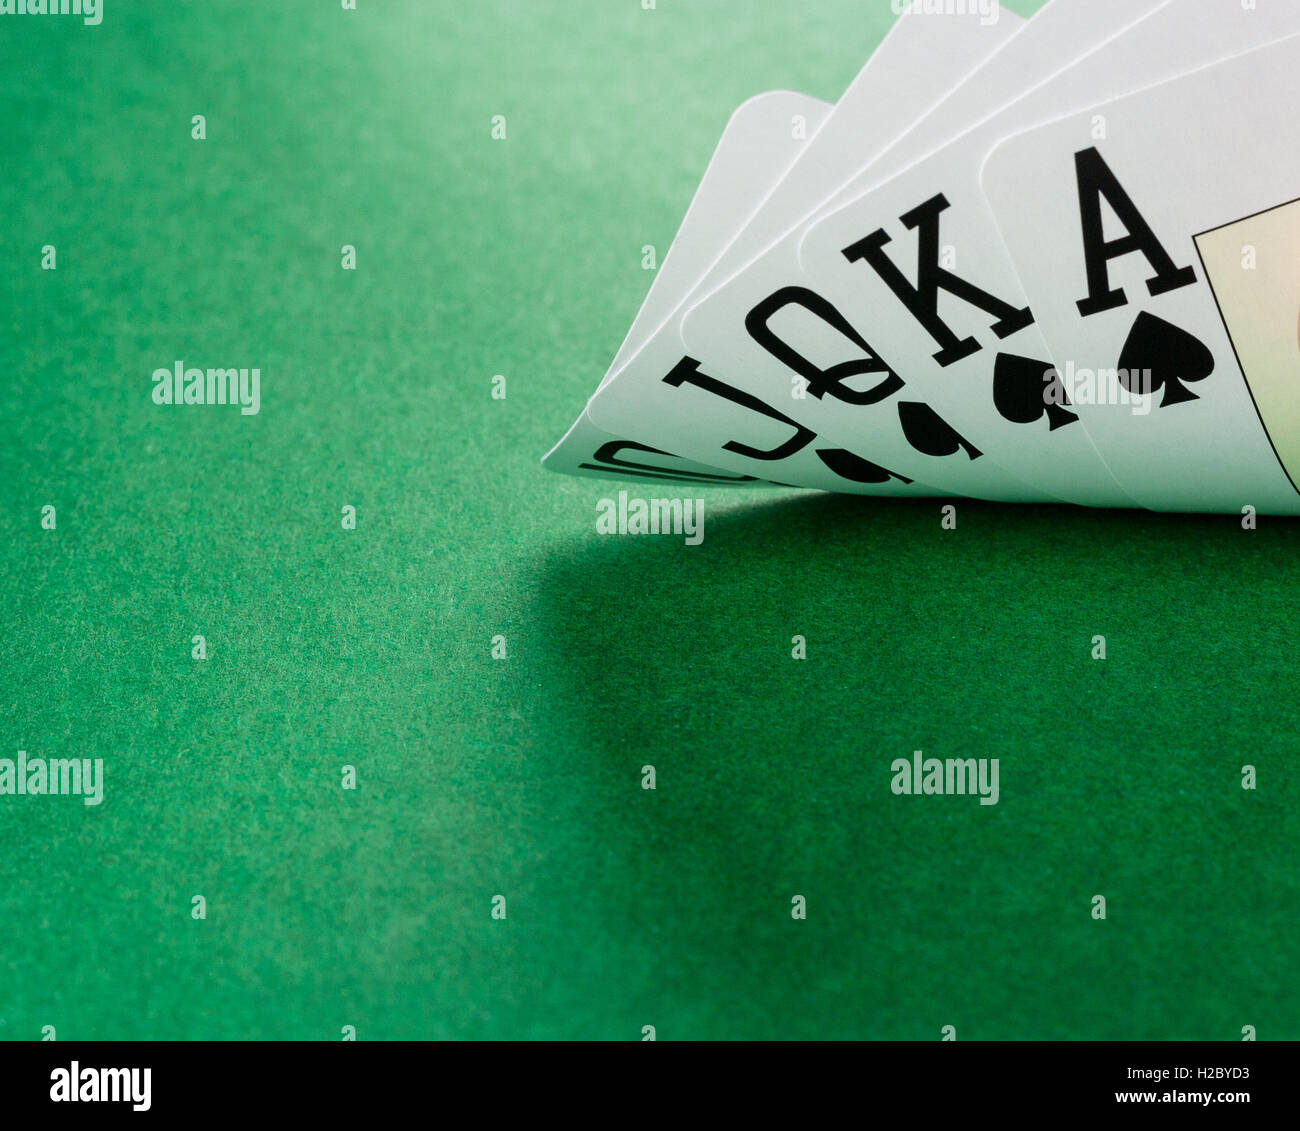 Playing cards showing a wining hand of poker - Royal Flush Stock Photo